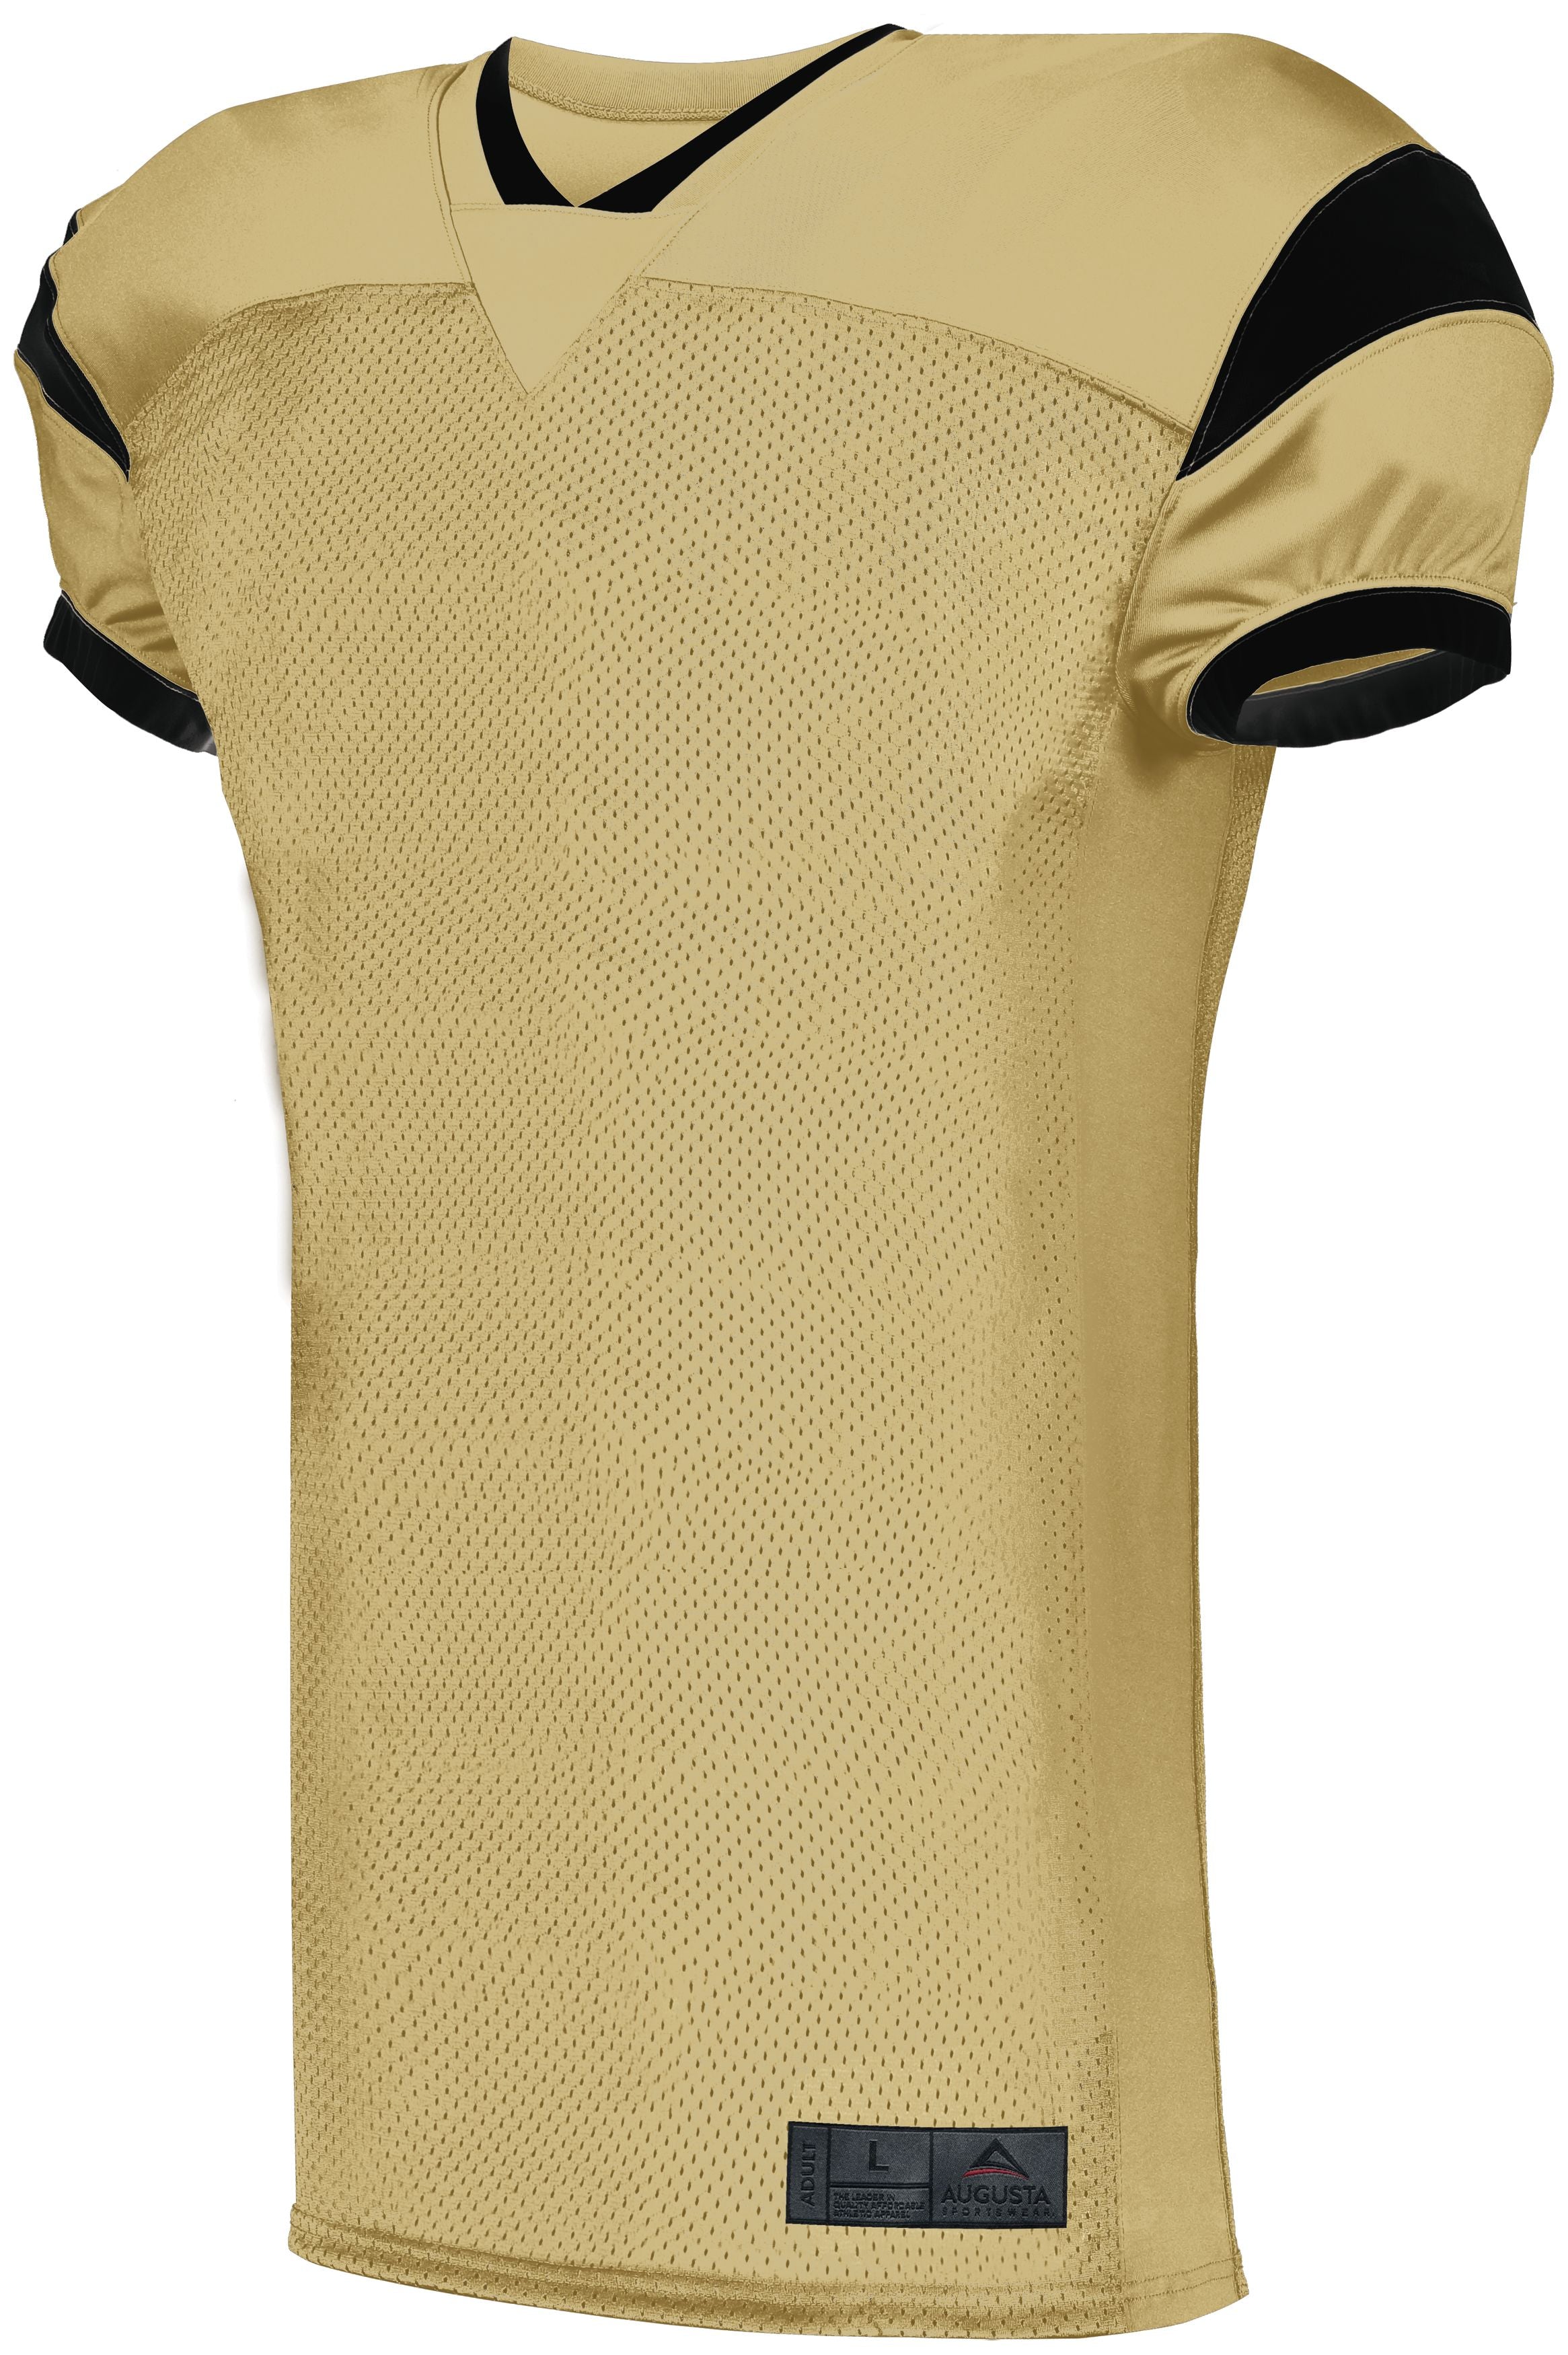 Augusta Sportswear Youth Slant Football Jersey in Vegas Gold/Black  -Part of the Youth, Youth-Jersey, Augusta-Products, Football, Shirts, All-Sports, All-Sports-1 product lines at KanaleyCreations.com